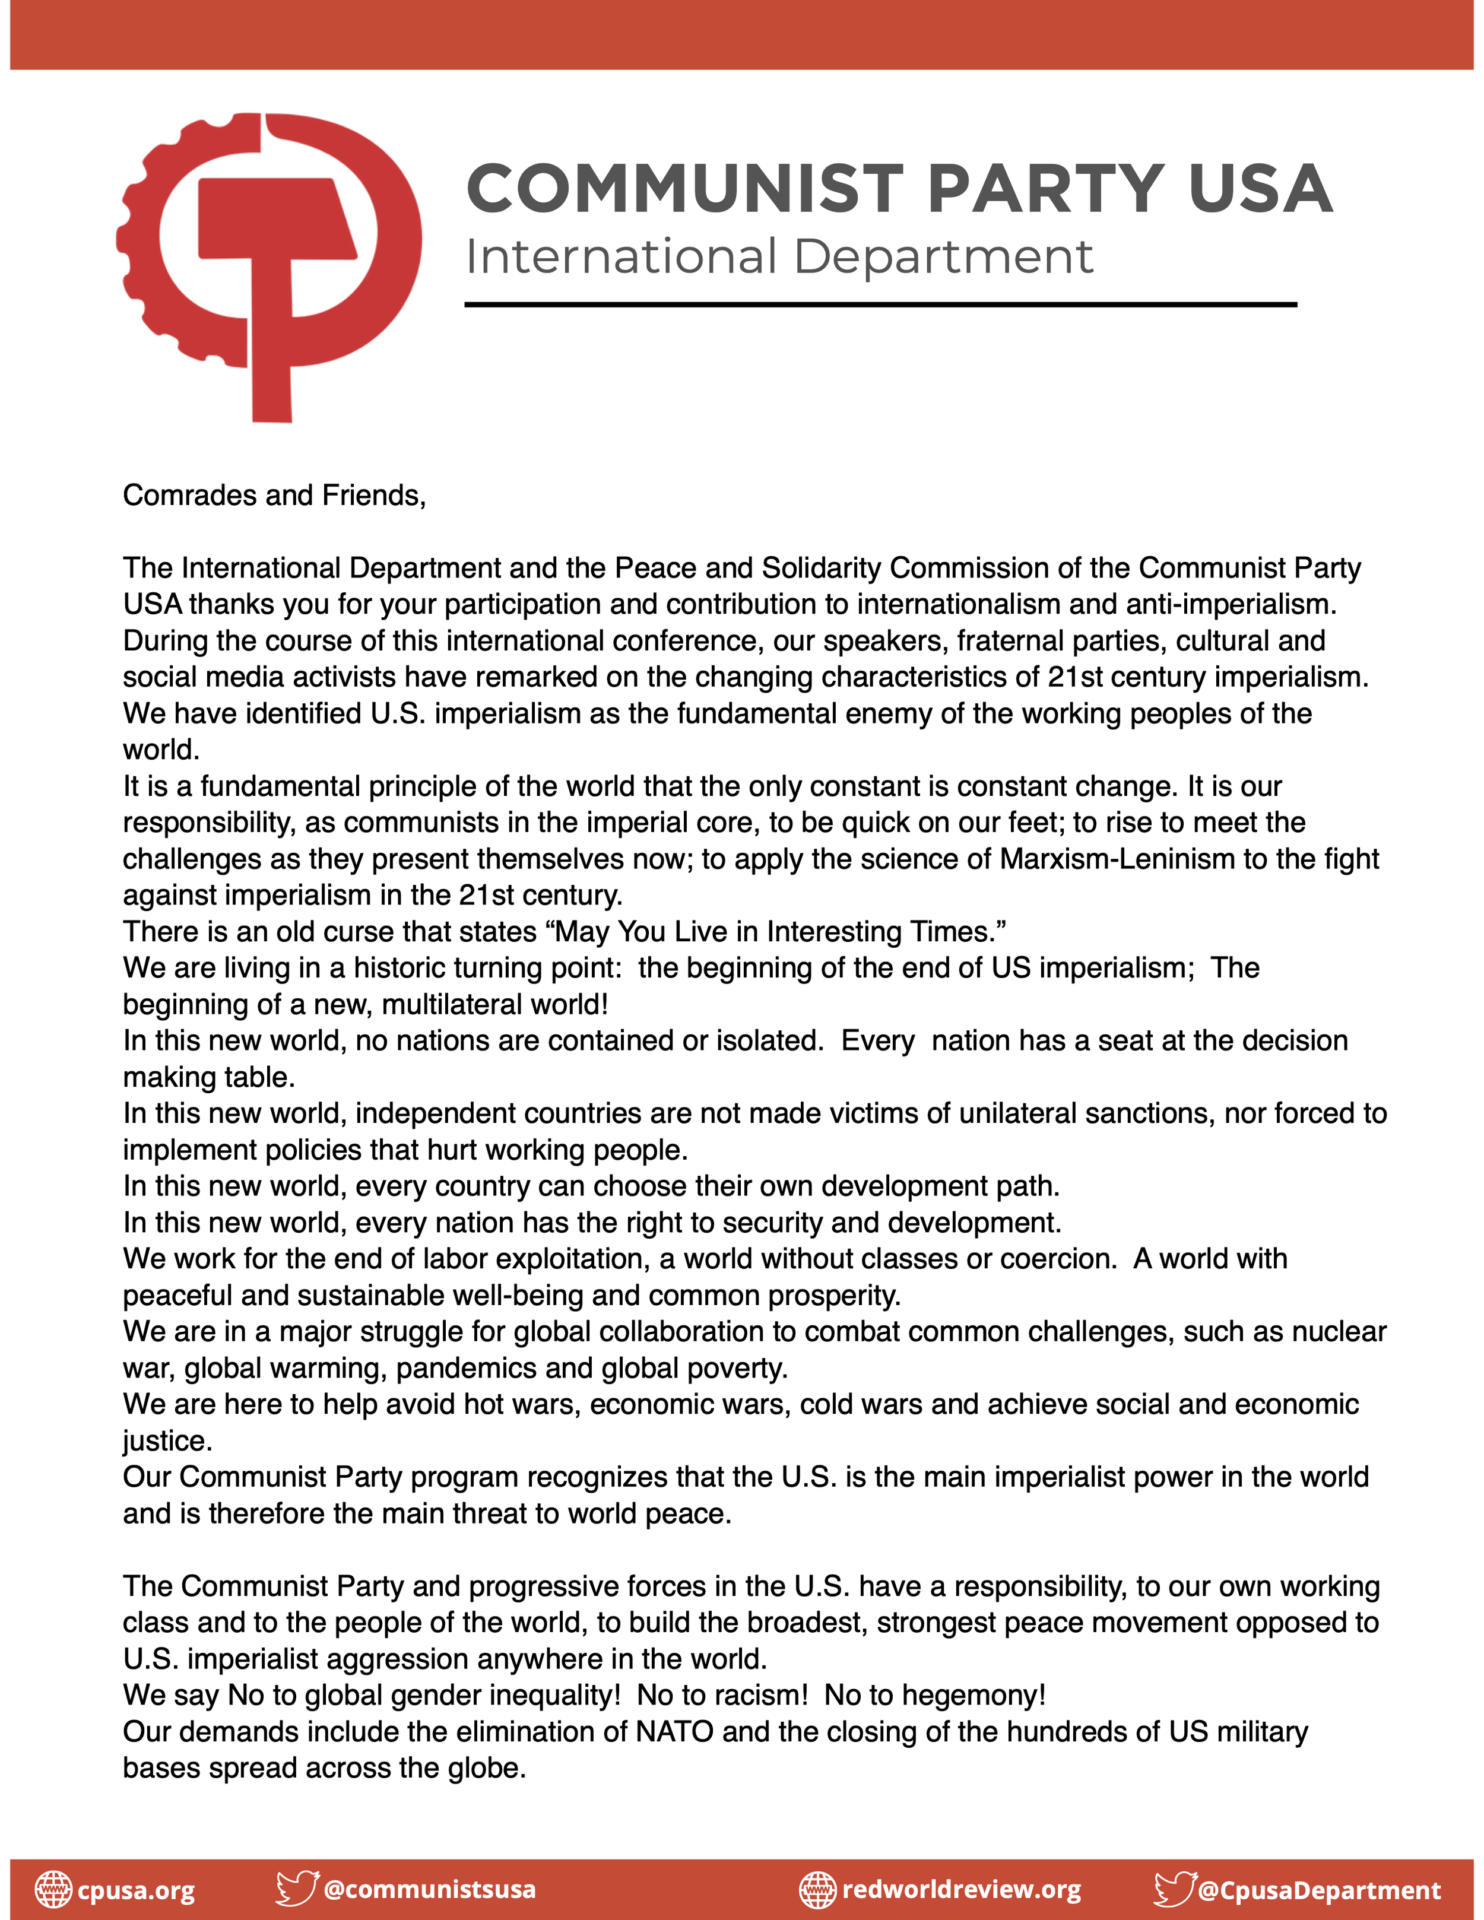 CPUSA International Department Summary Statement on the Successful International Conference